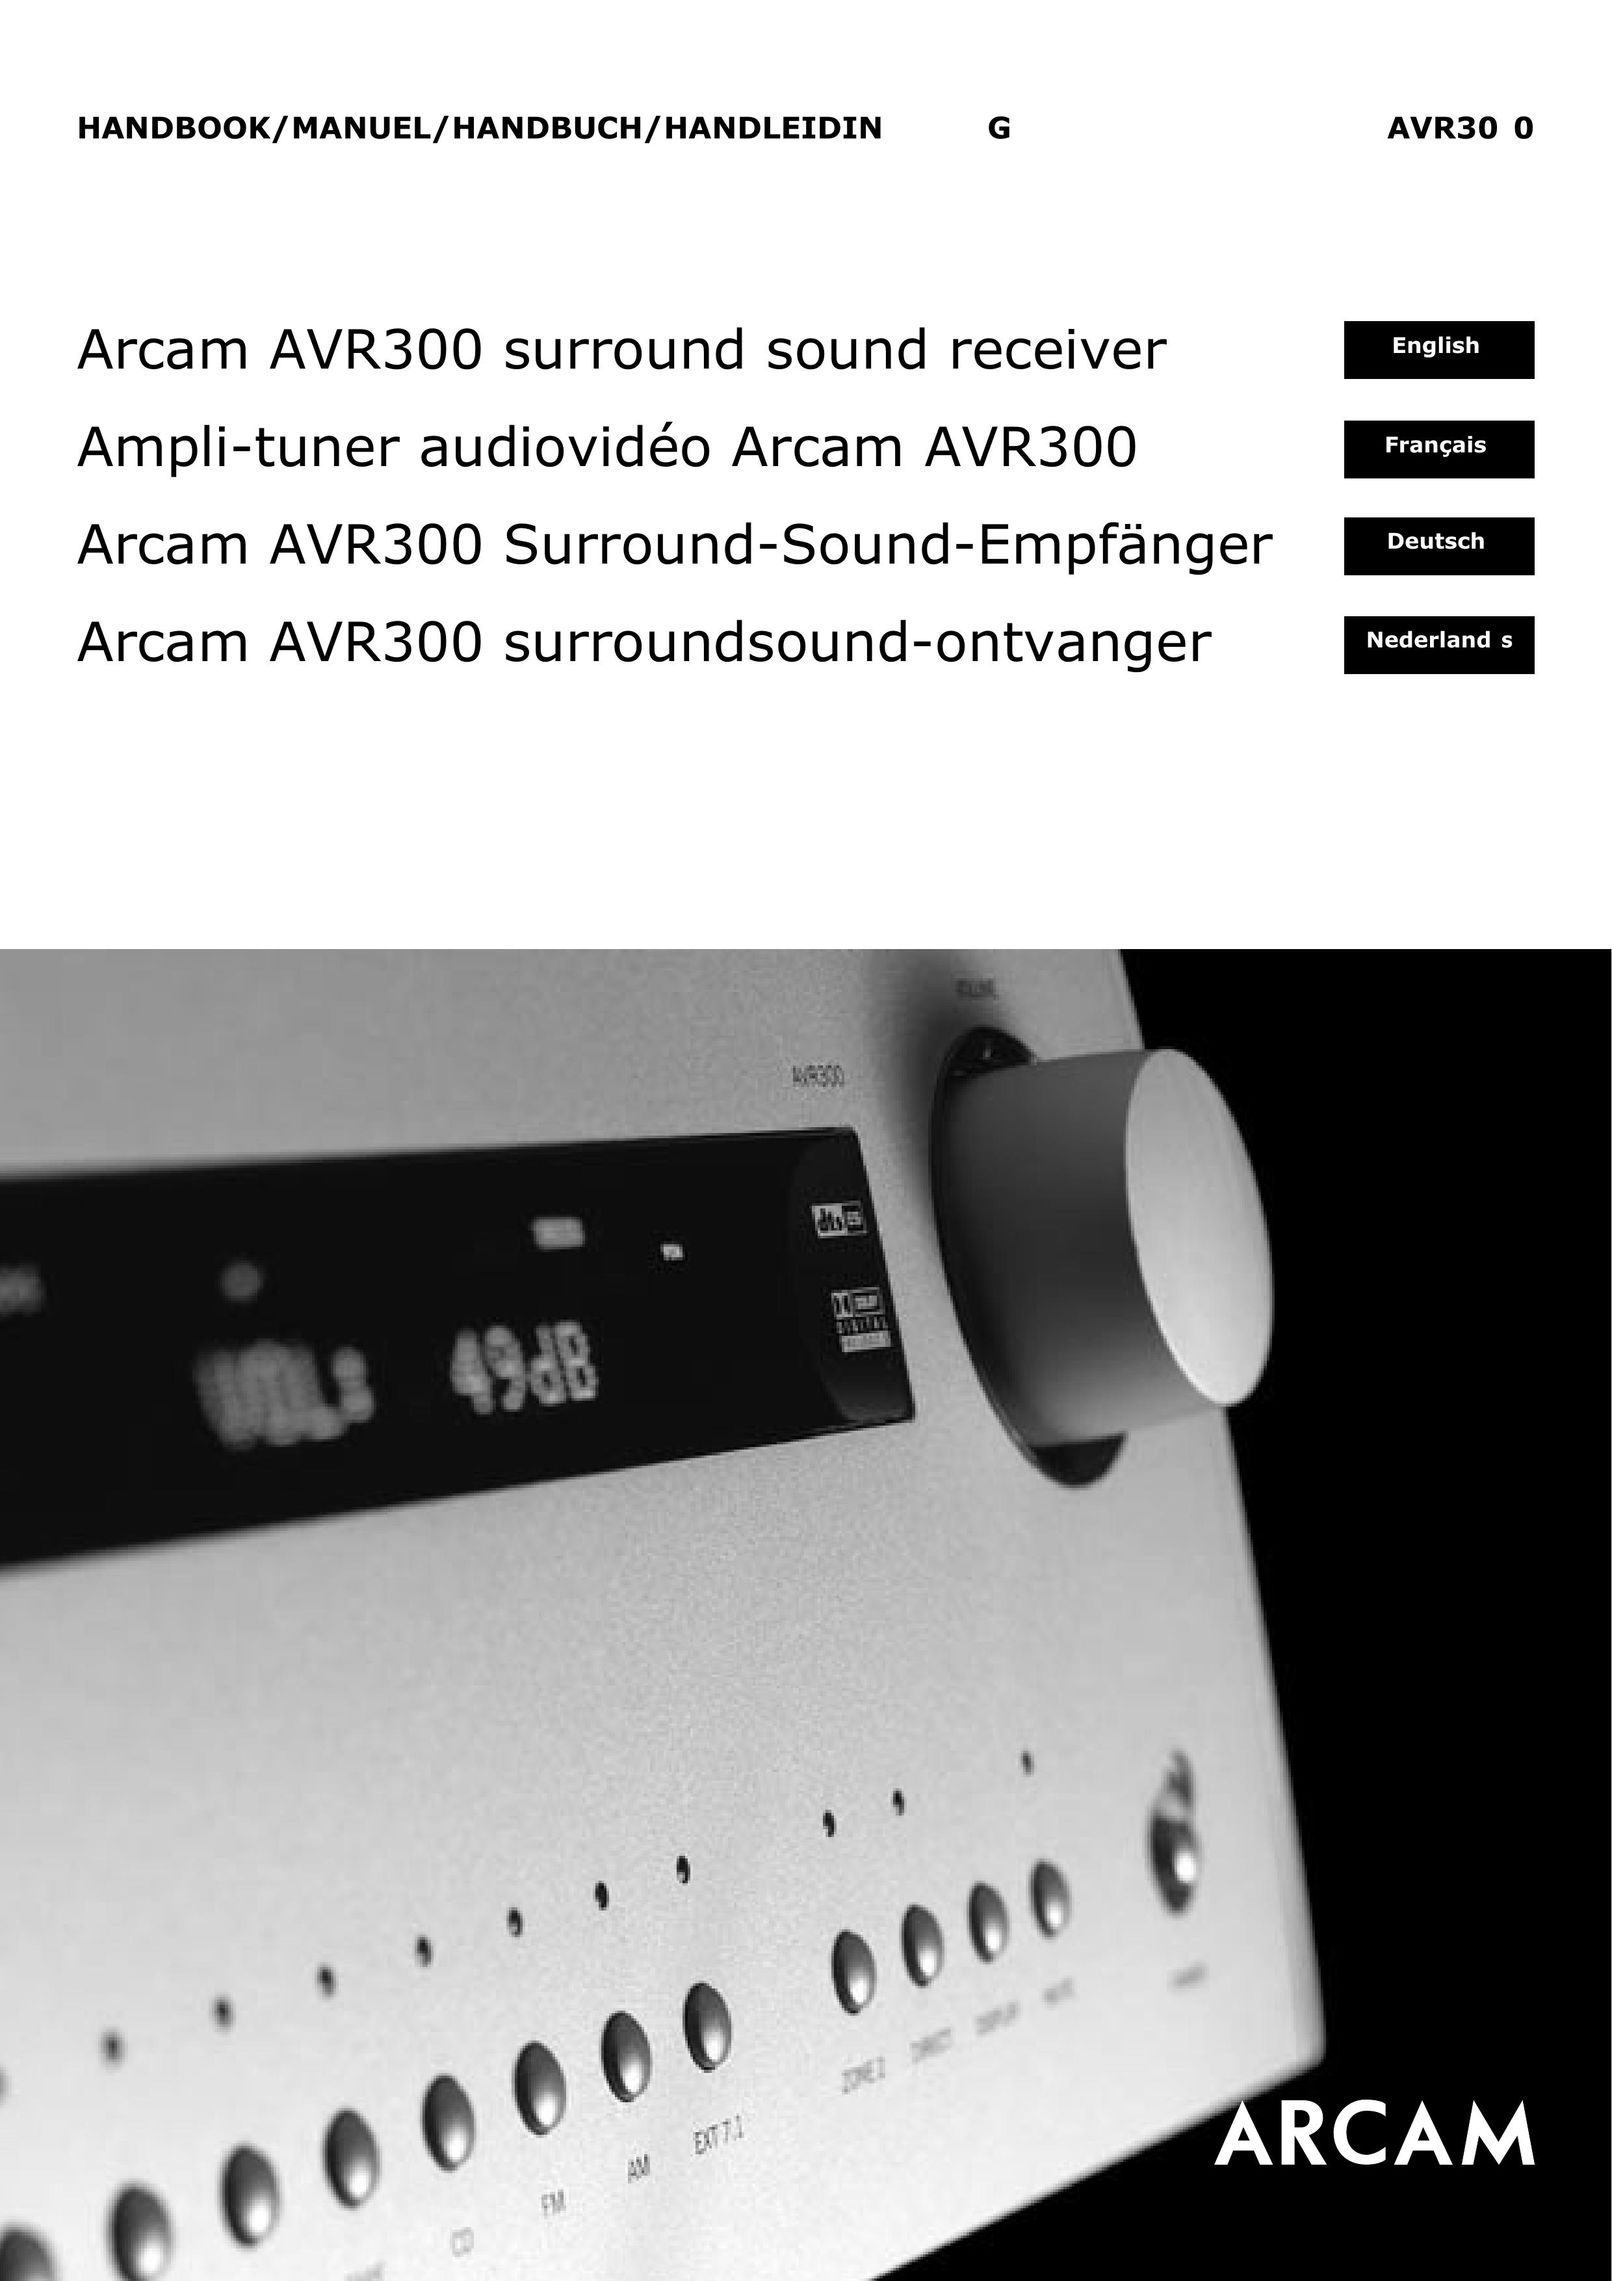 Arcam AVR300 Home Theater System User Manual